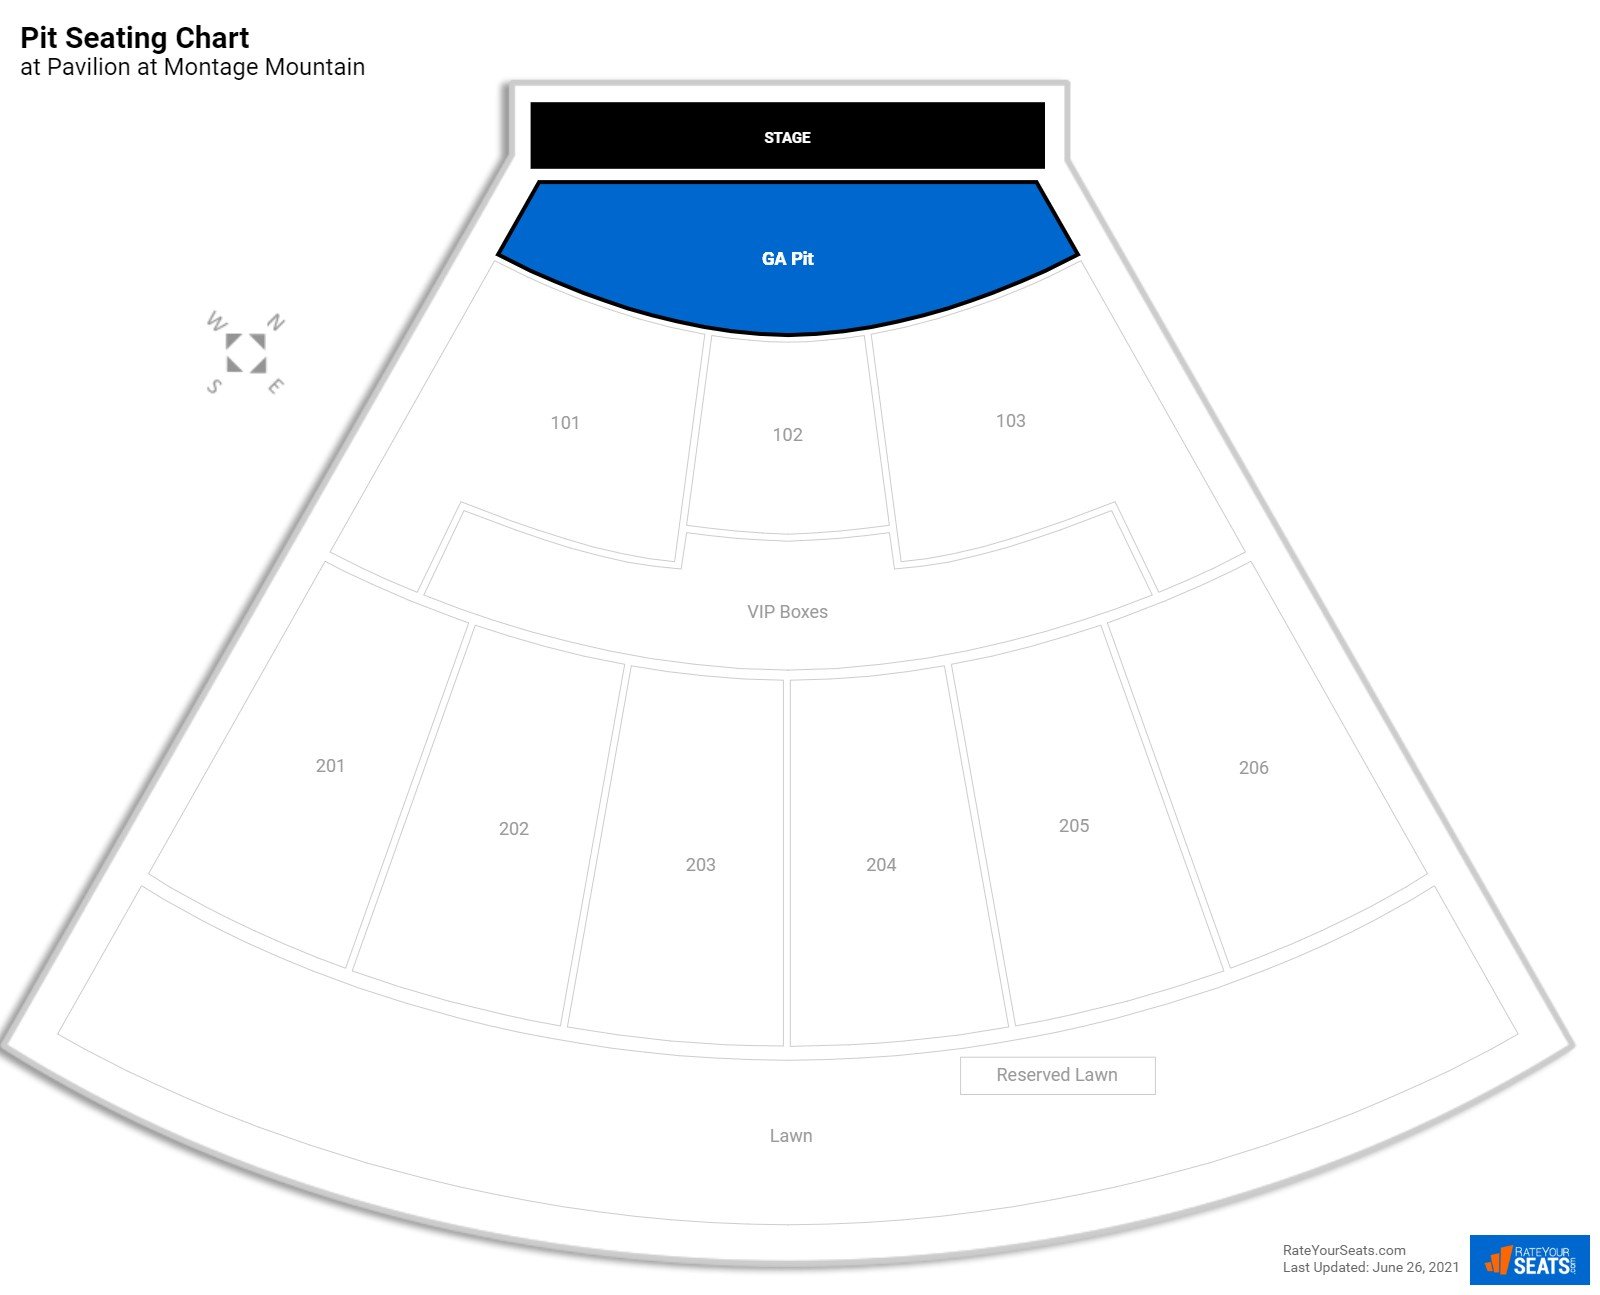 Concert Pit Seating Chart at Pavilion at Montage Mountain